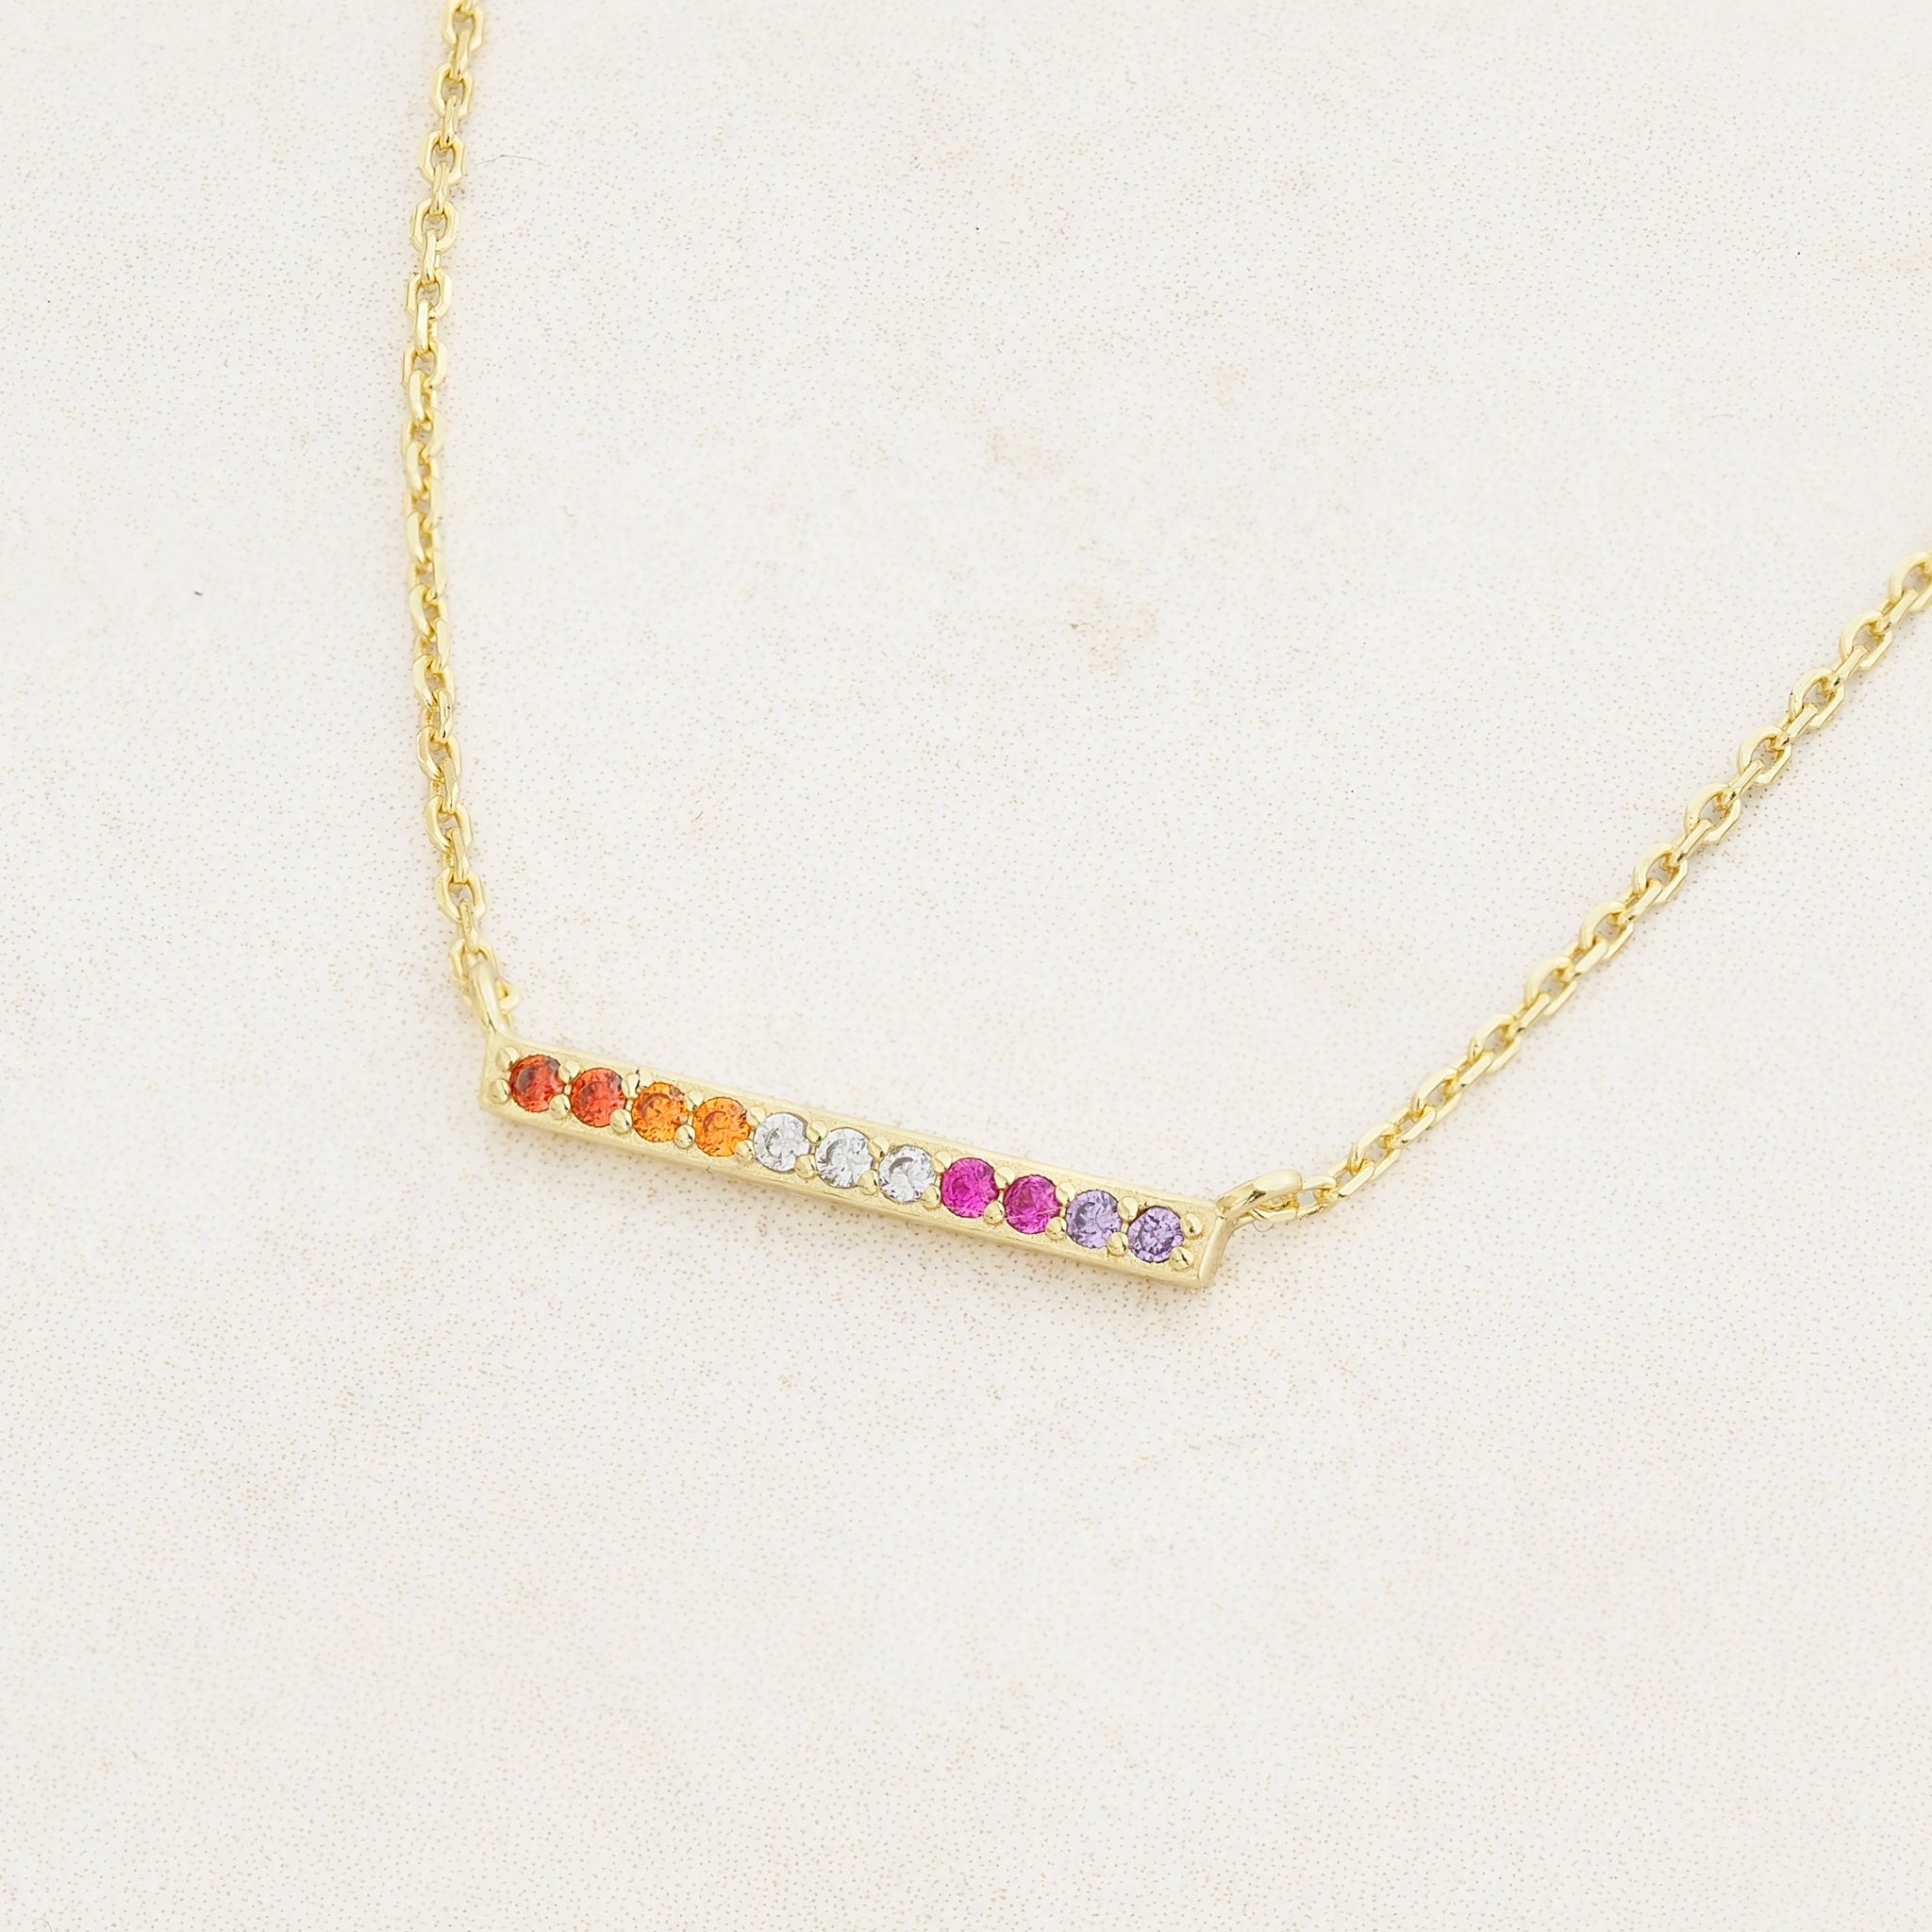 Lesbian line necklace featuring colours of the lesbian flag, right angle